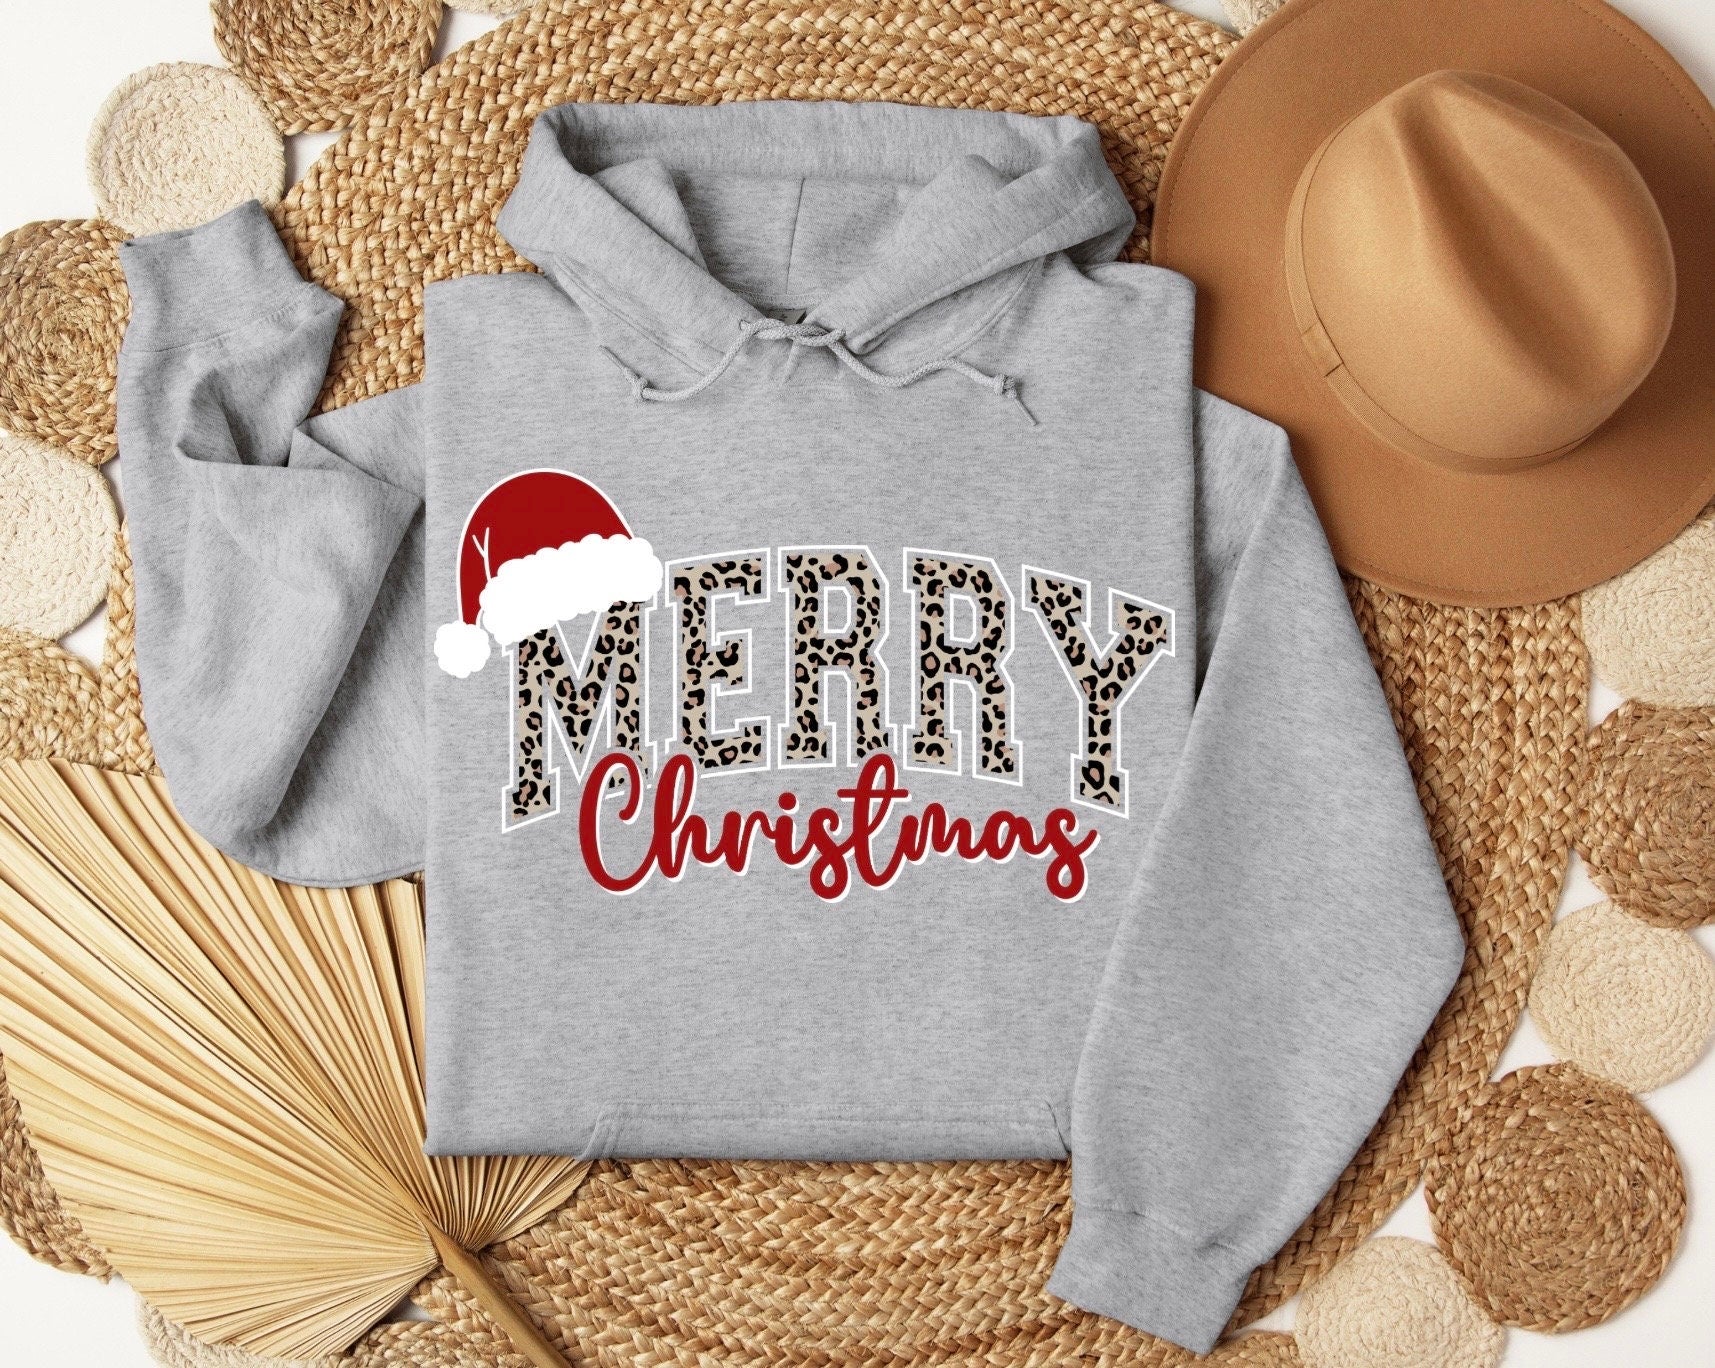 Merry Christmas sweater, Santa baby, Cute Christmas Sweatshirt, Christmas Shirt, Holiday Xmas Tee, Snowman Sweater, womans sweater, Farm Fre